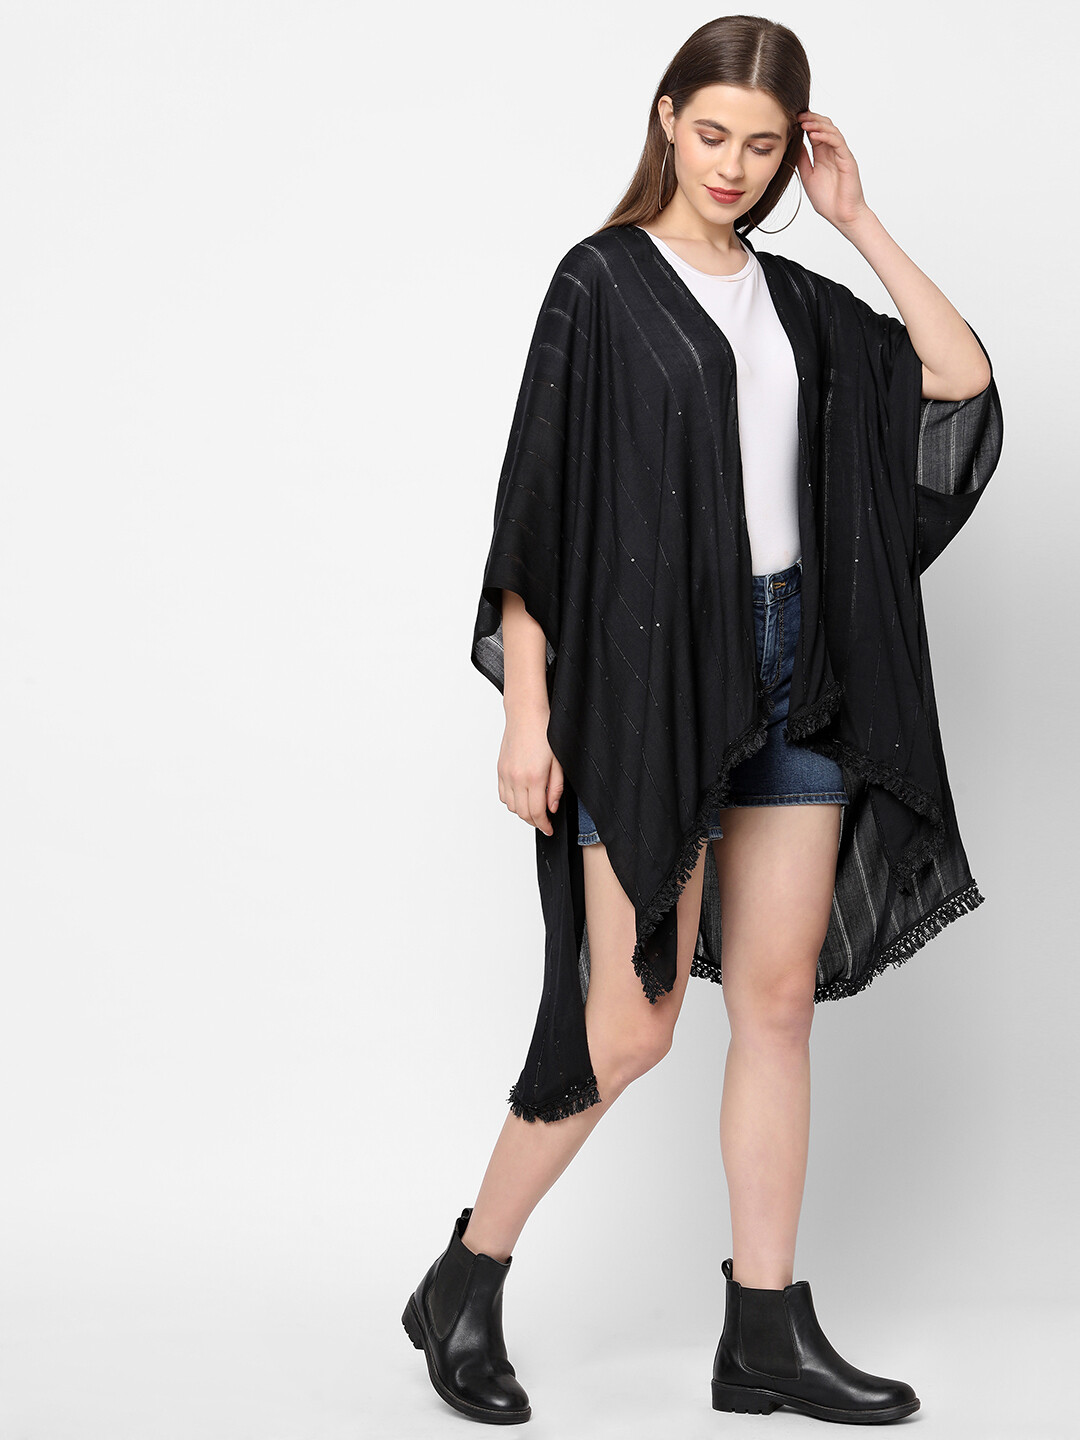 Sequins Fabric Black Kimono with Lace